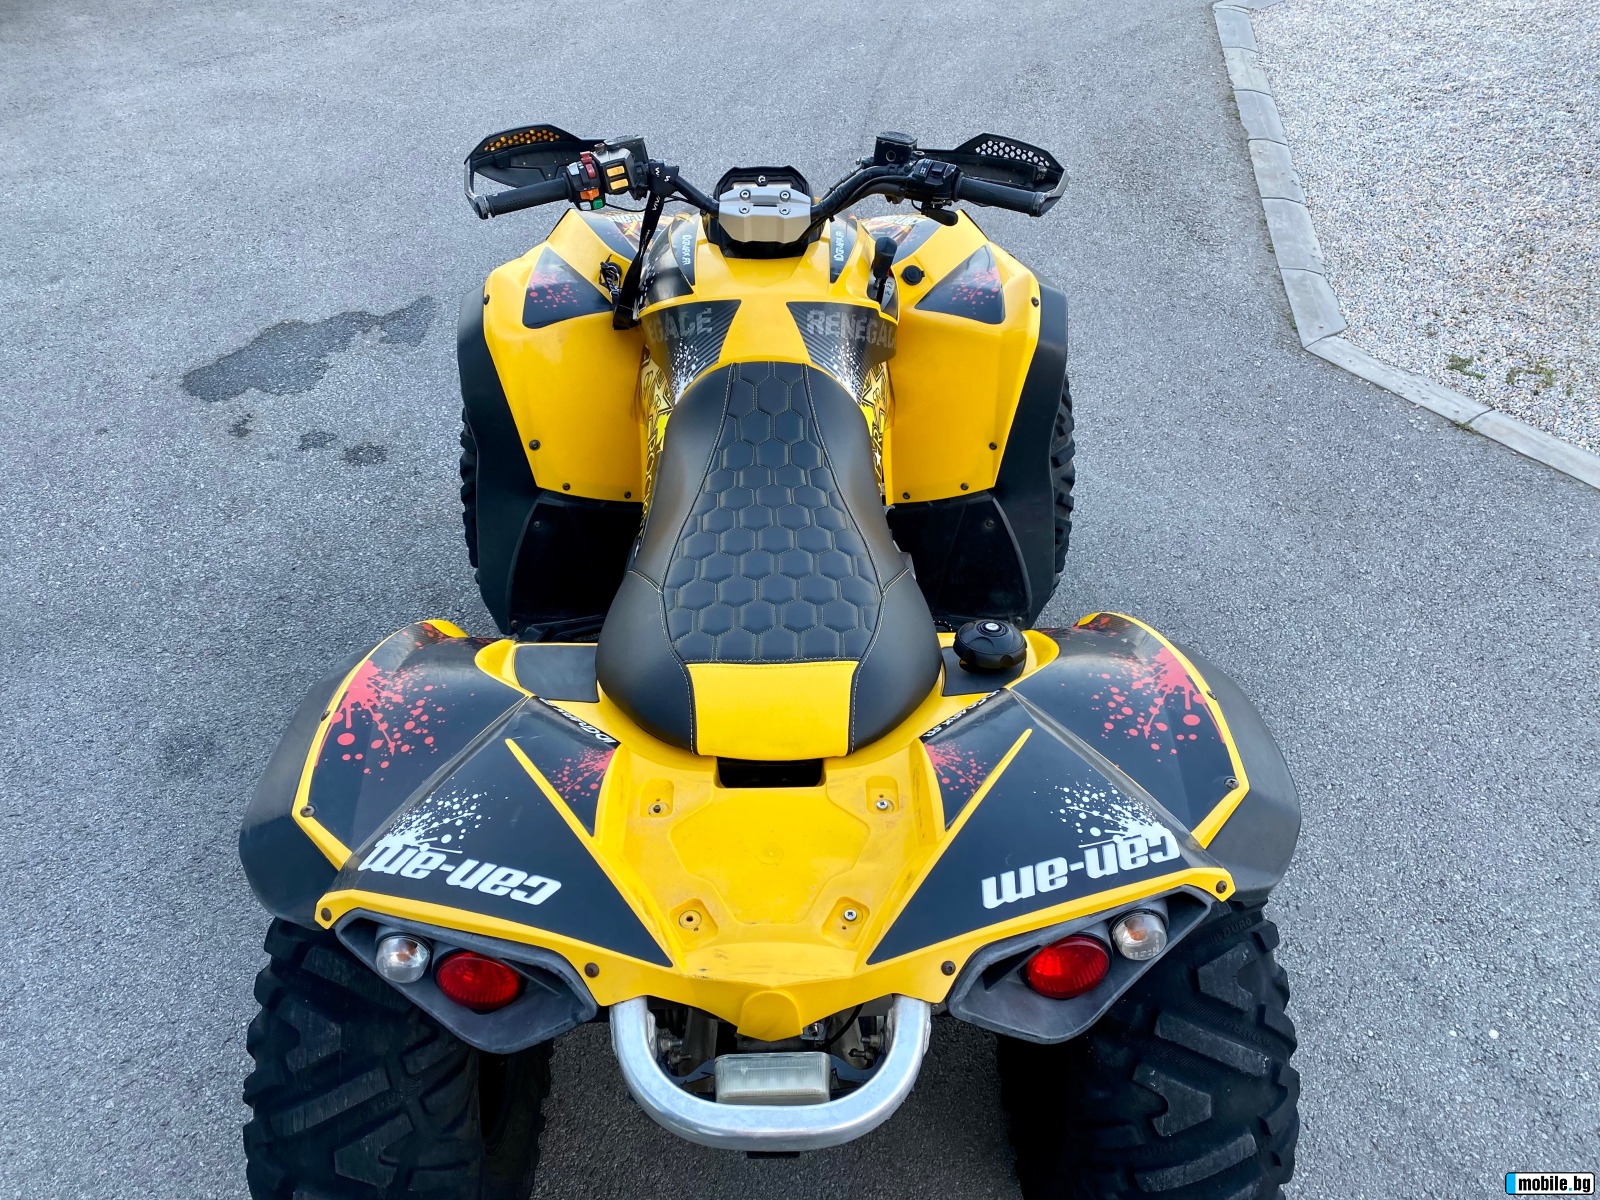 Can-Am Rengade 800r | Mobile.bg   8